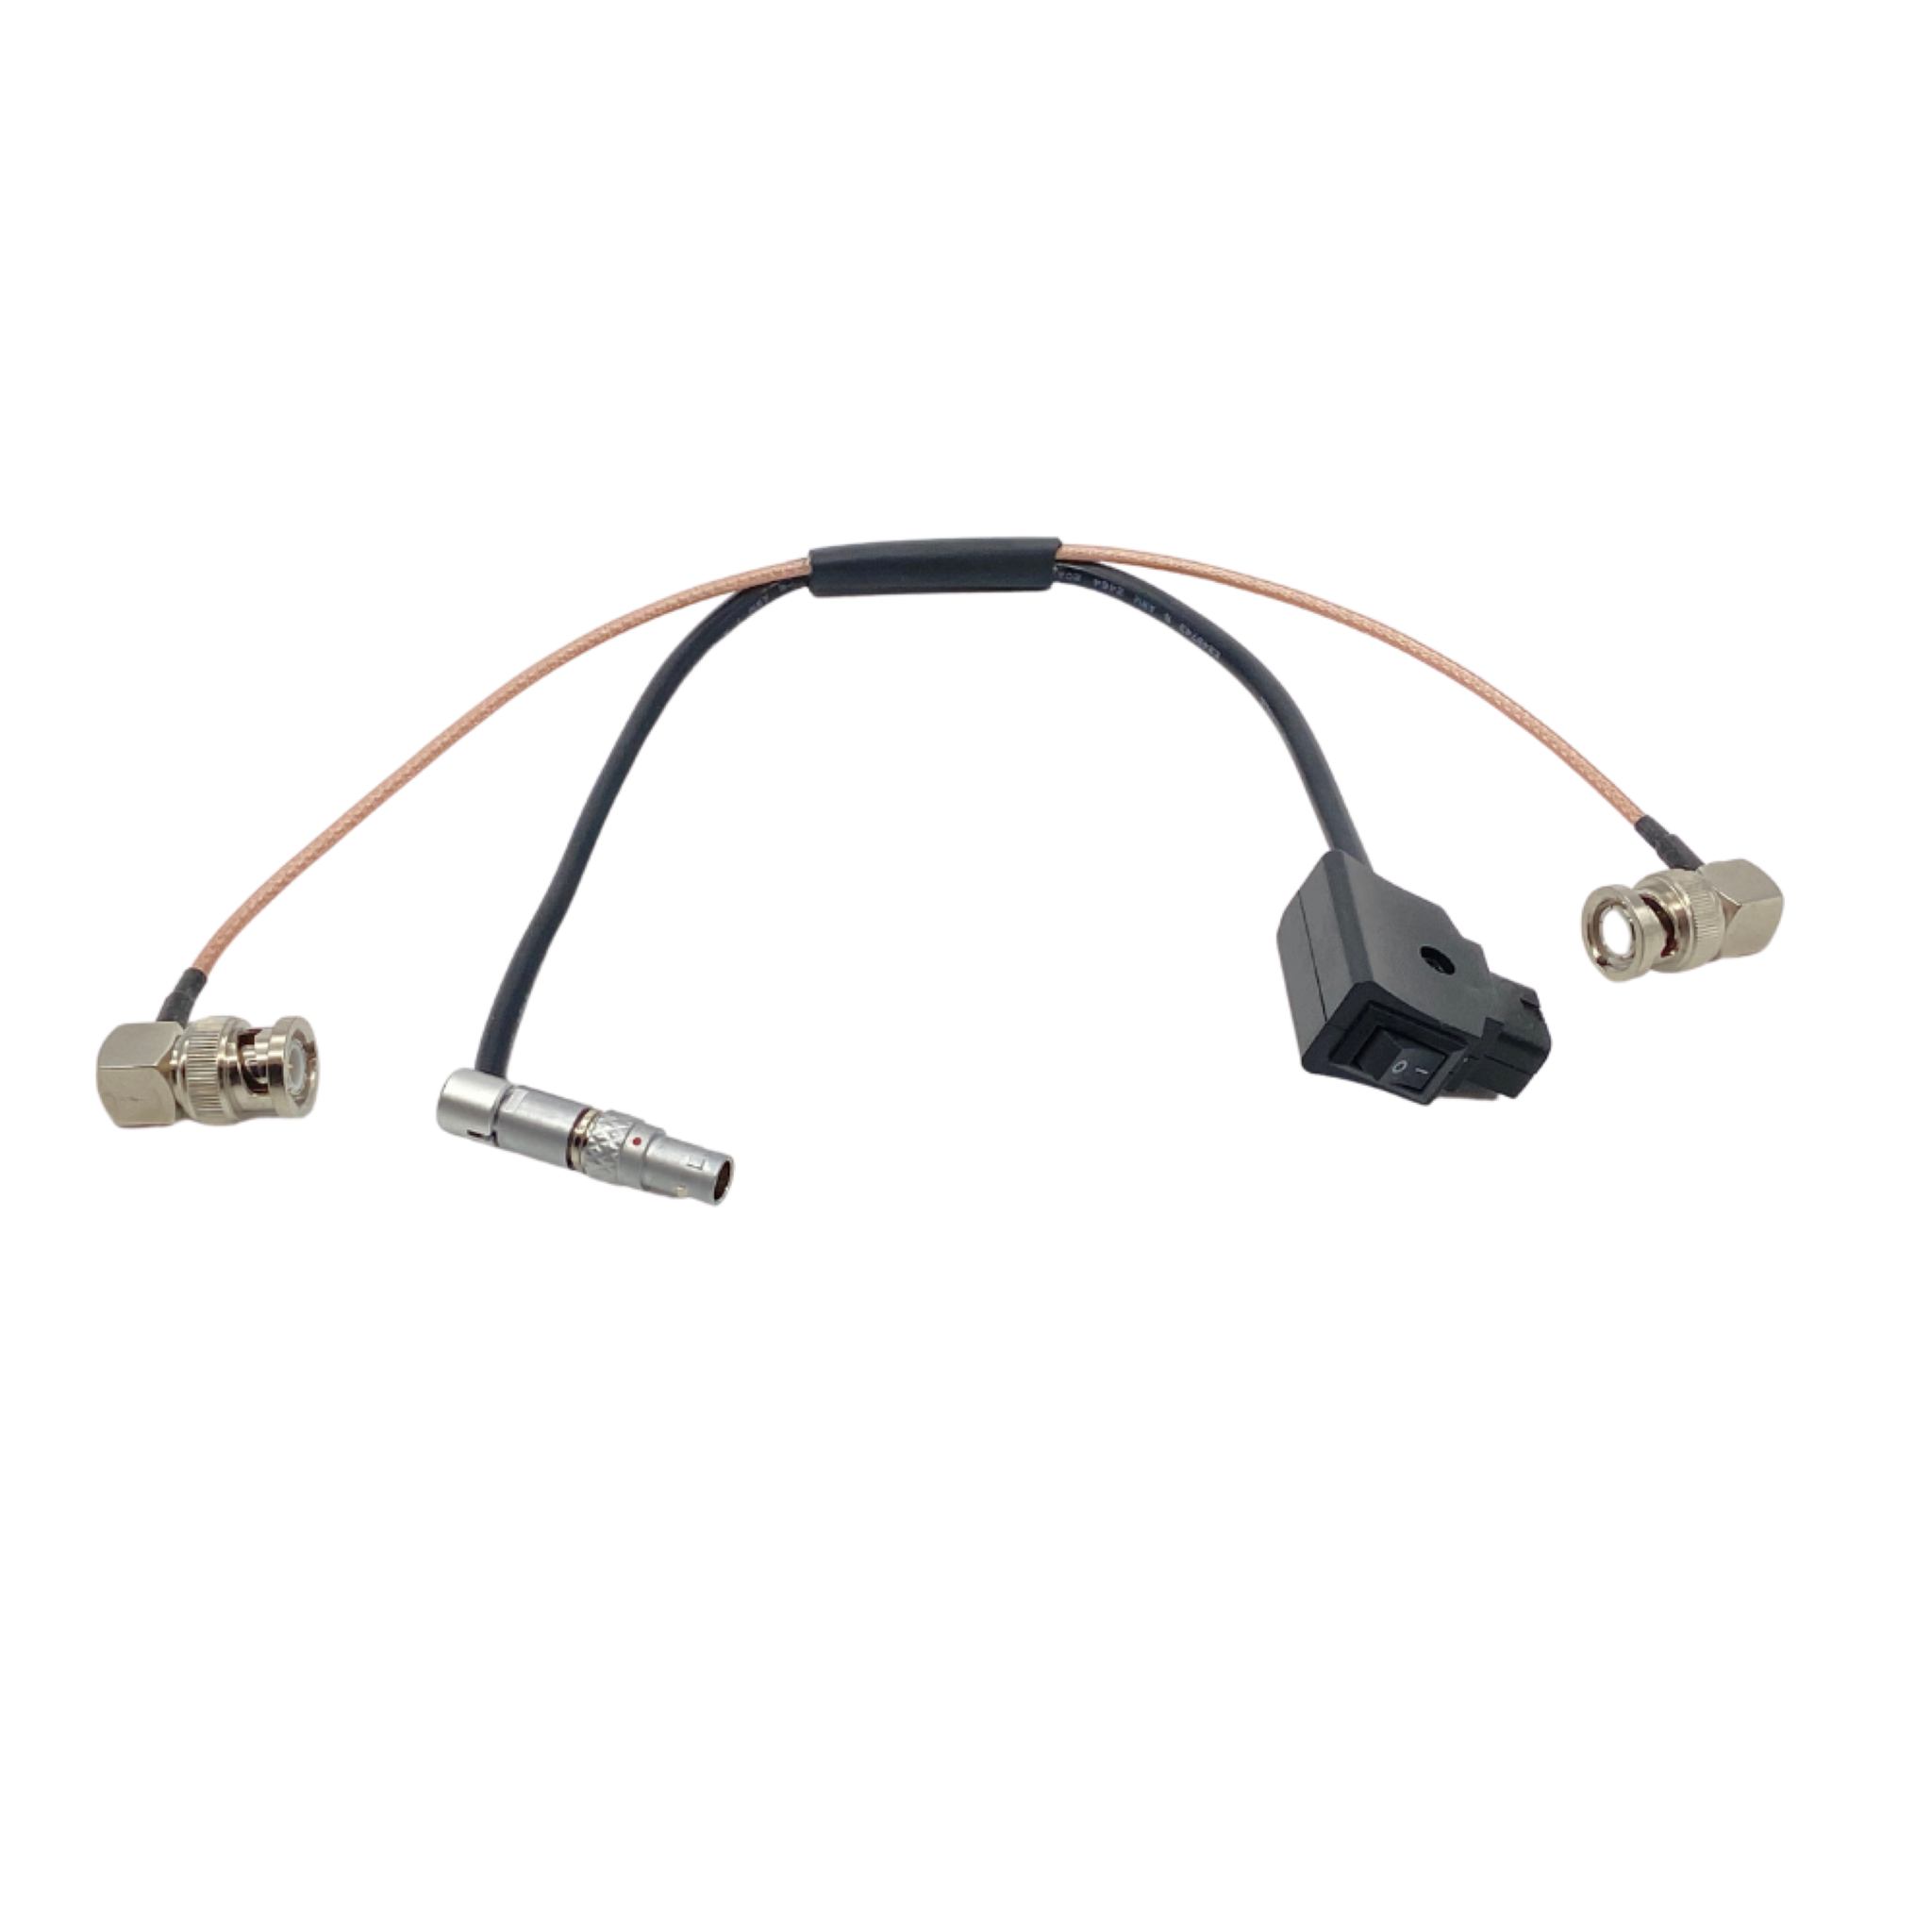 4 Pin Lemo Compatible Power & SDI Video Cable with Power Switch- 12